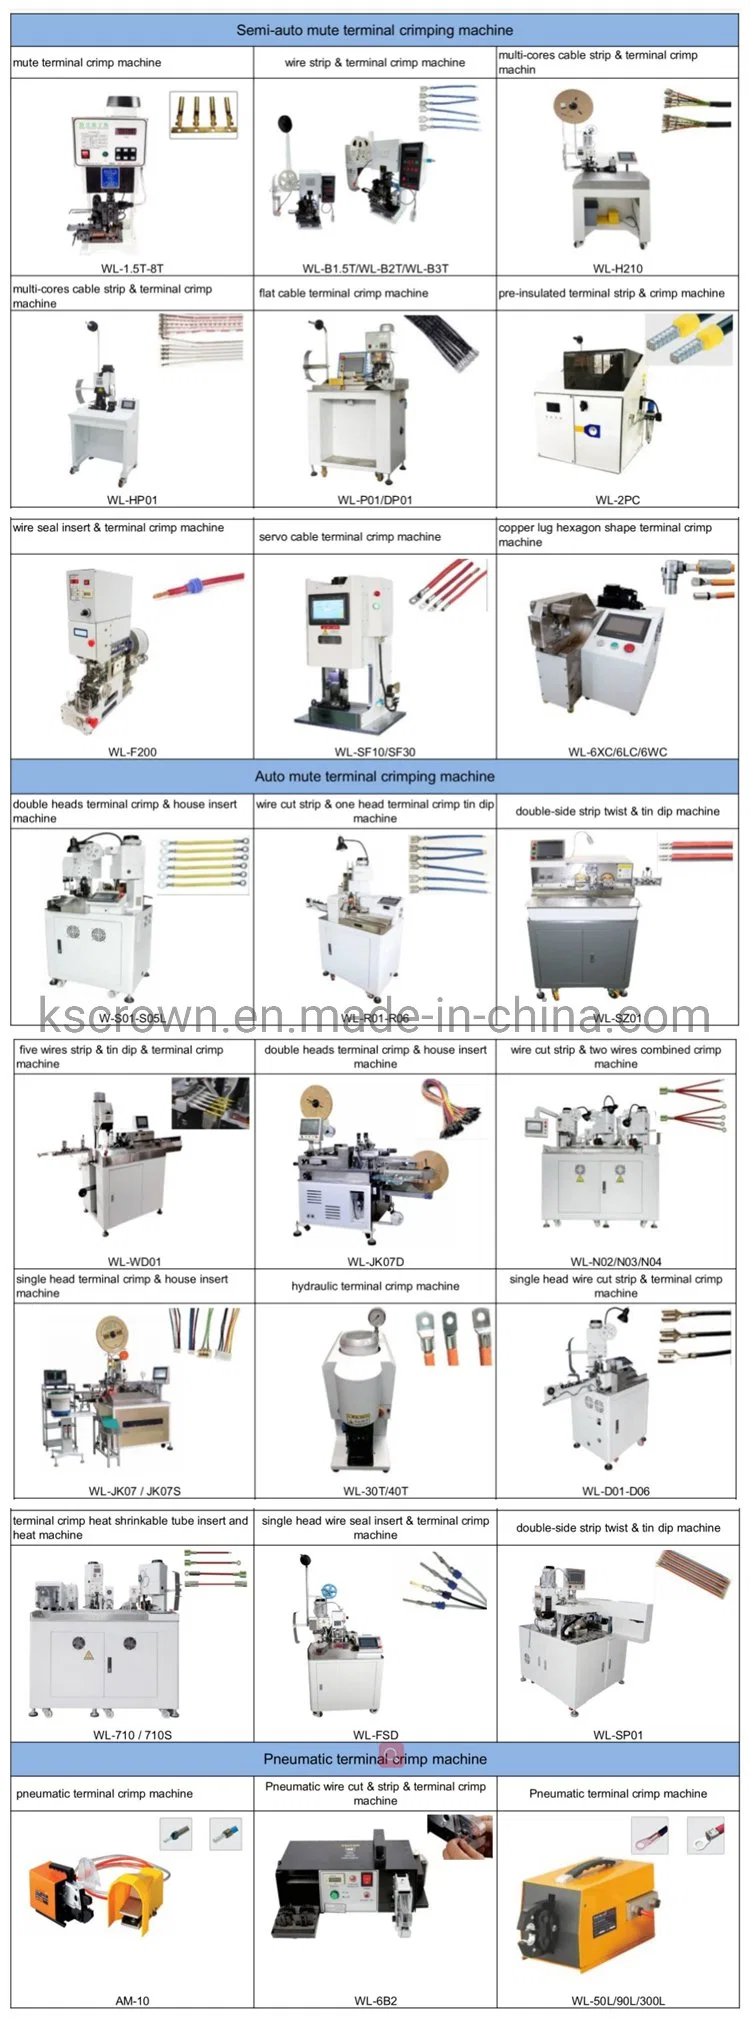 Automated Cable Assembly Machine Wire Cut off Insulation Strip Crimp Seal Insert Print Number Tube Insert and Heat Shrink Machine